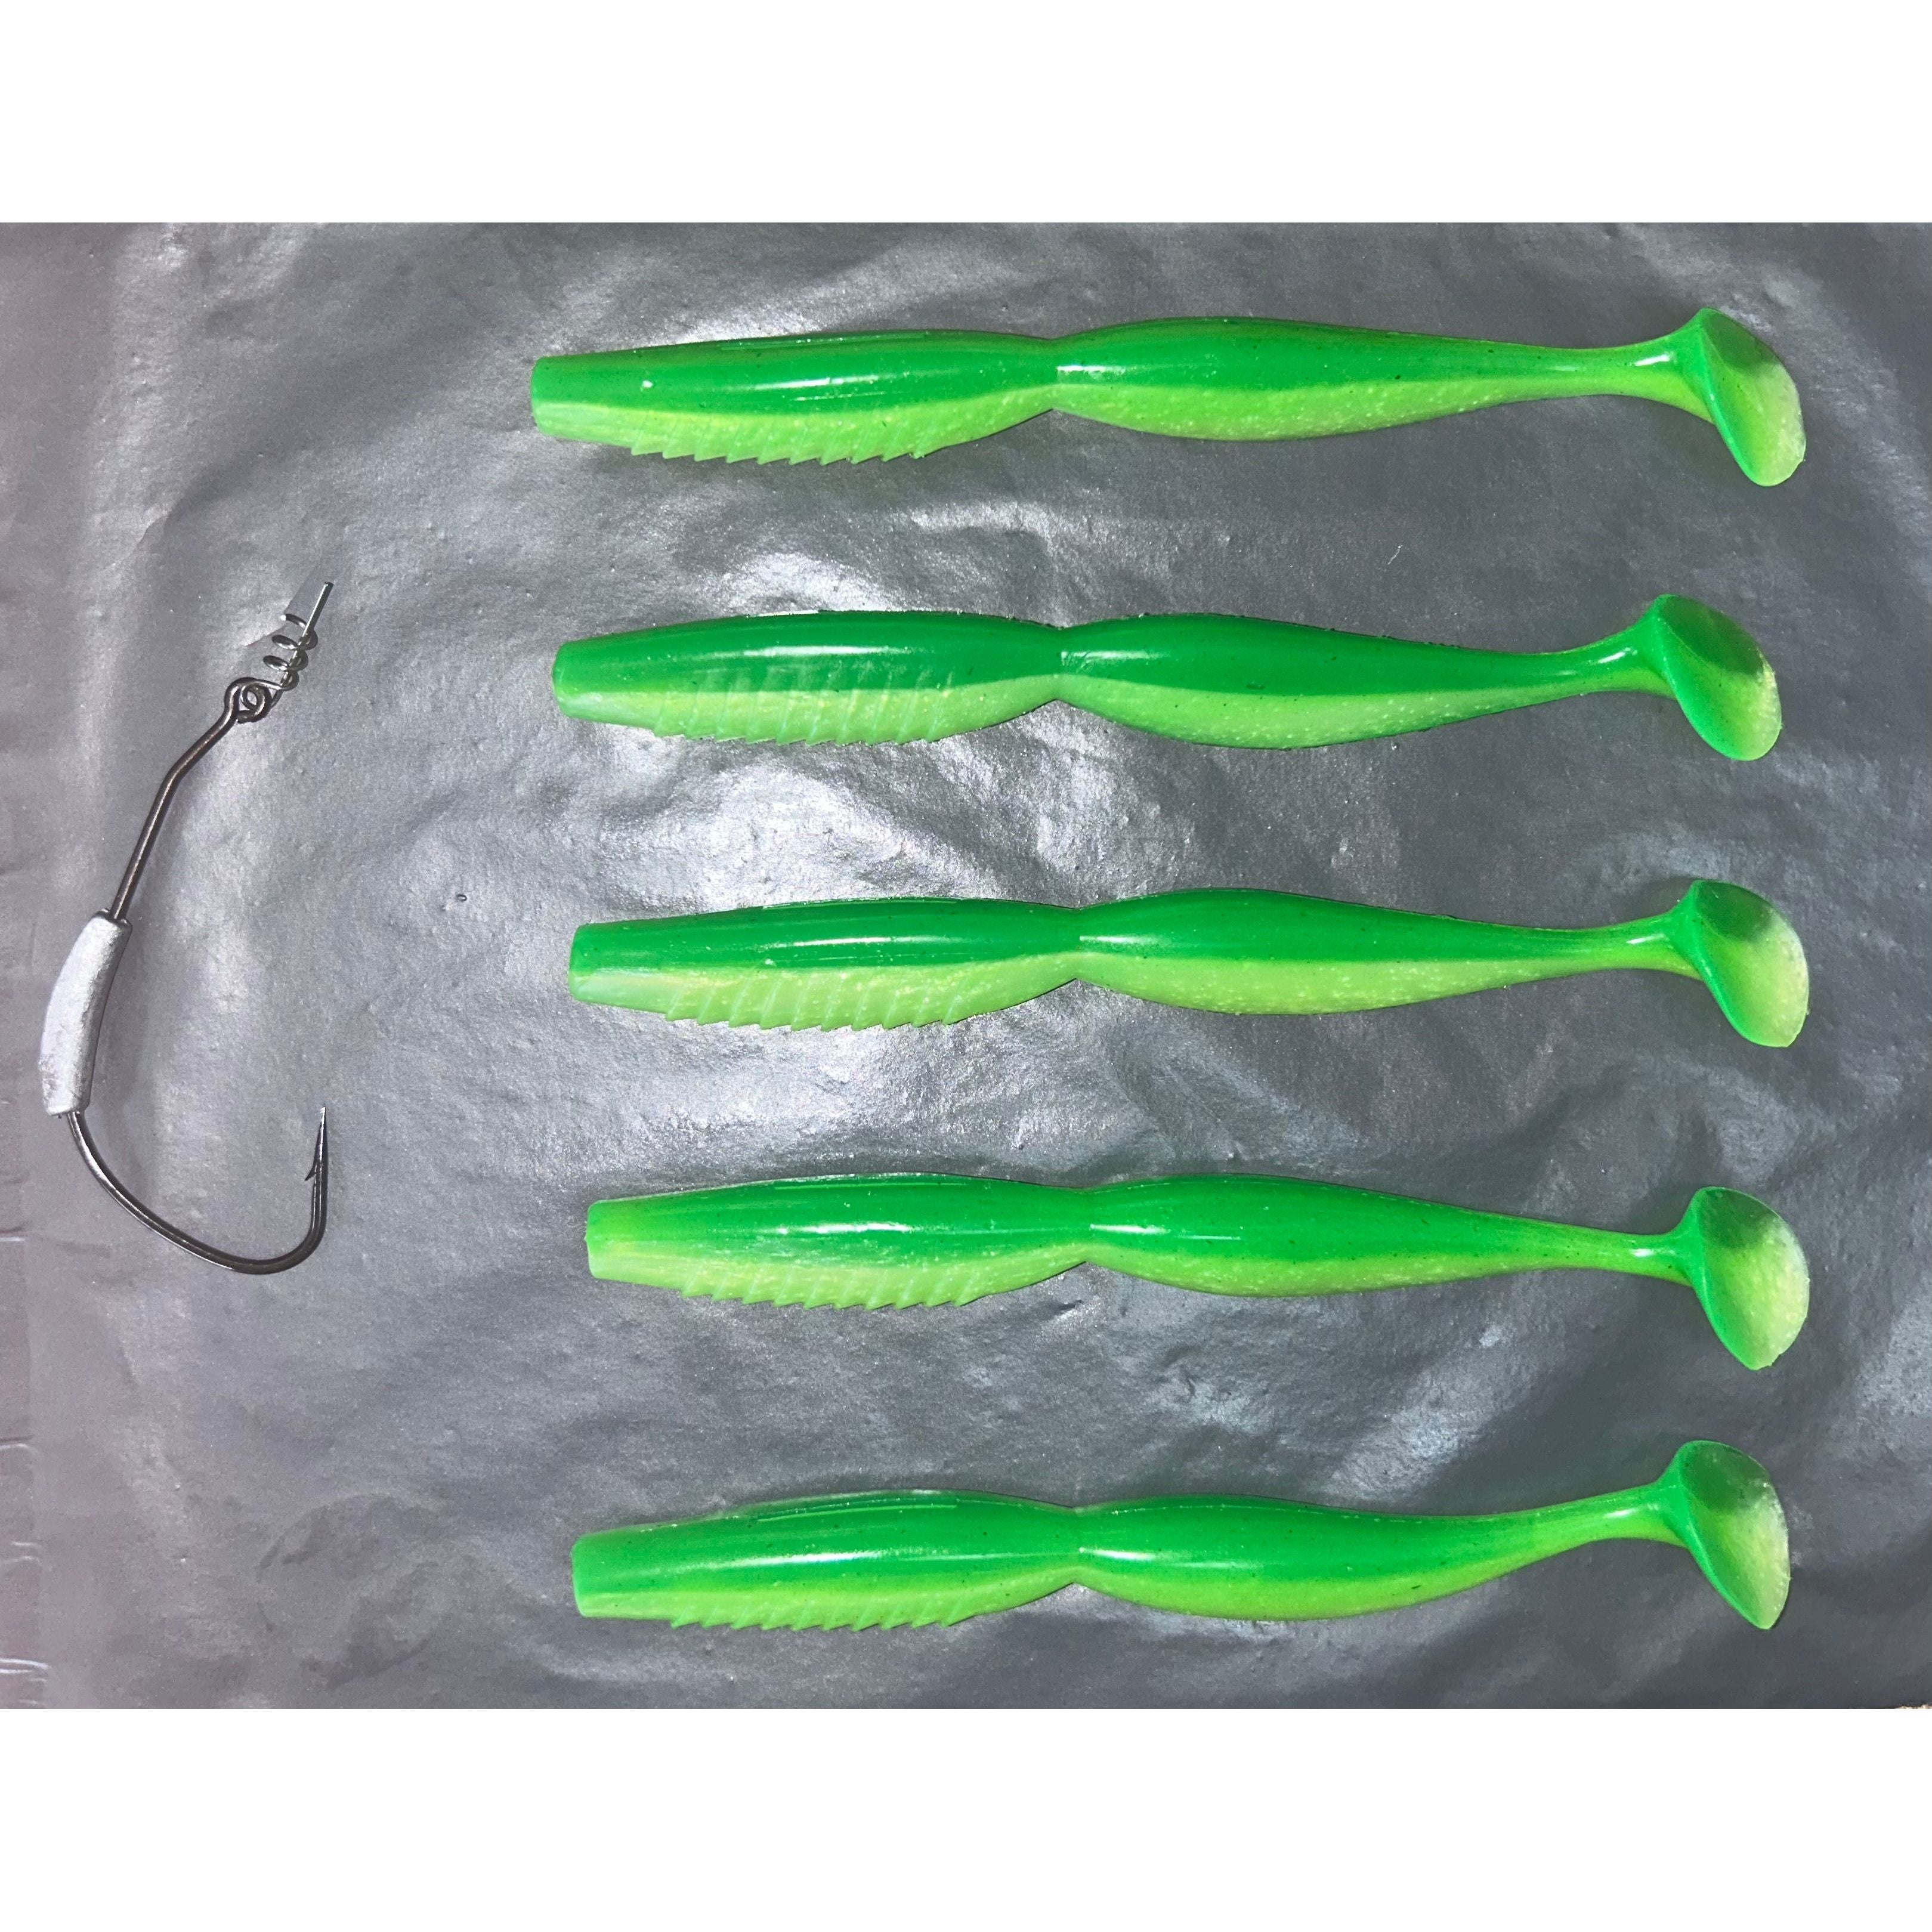 5” Spindle Paddle tail Spinning Lure Sets